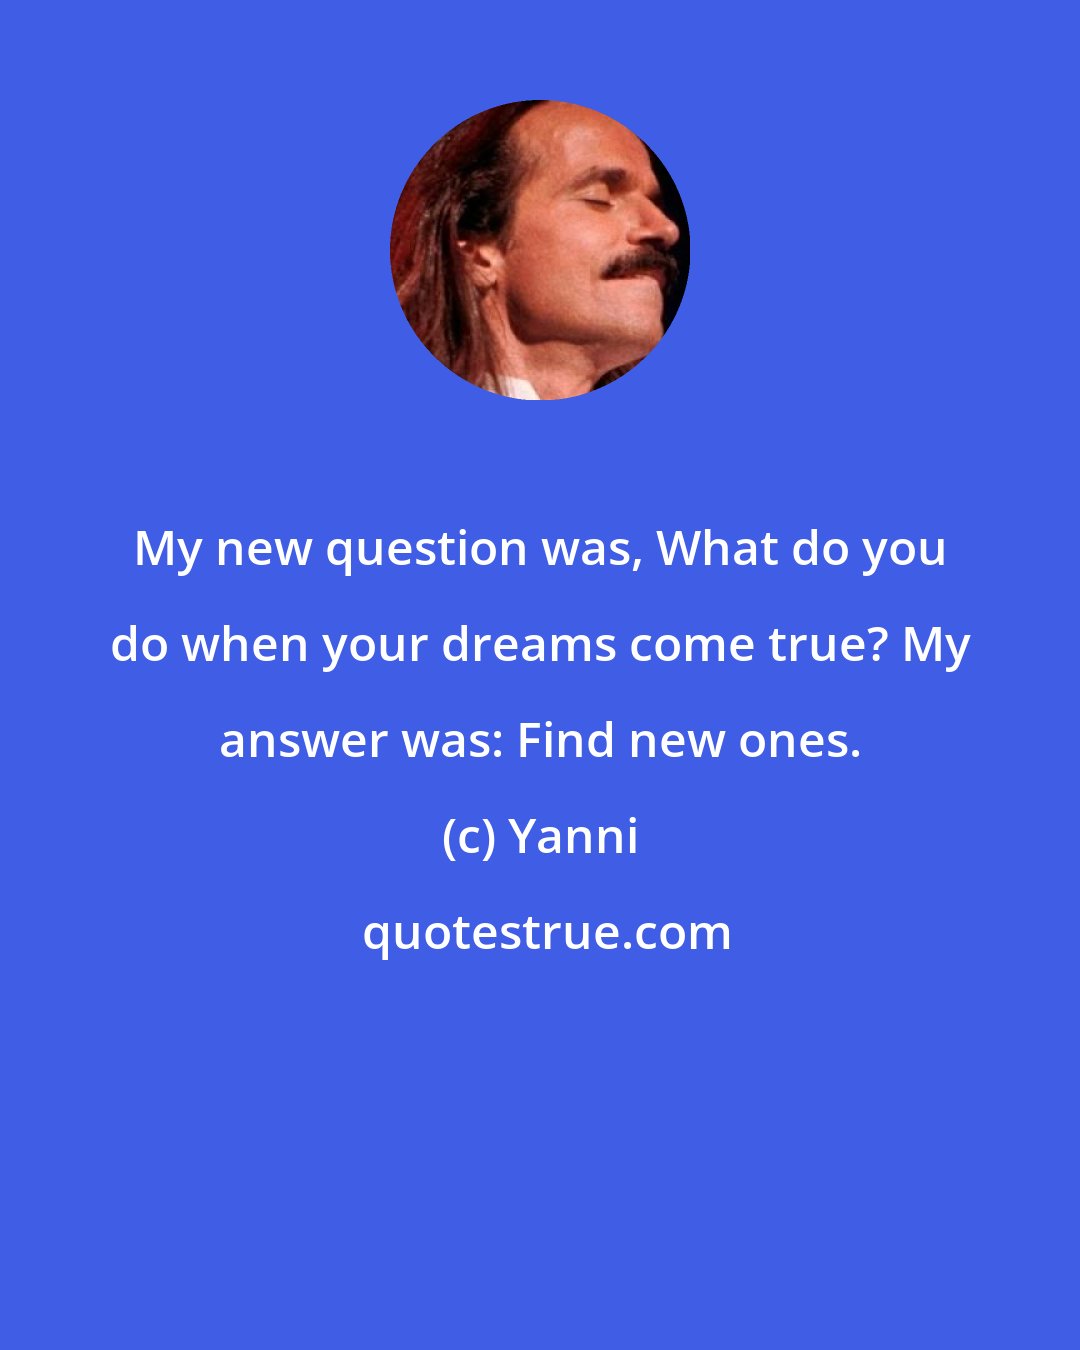 Yanni: My new question was, What do you do when your dreams come true? My answer was: Find new ones.